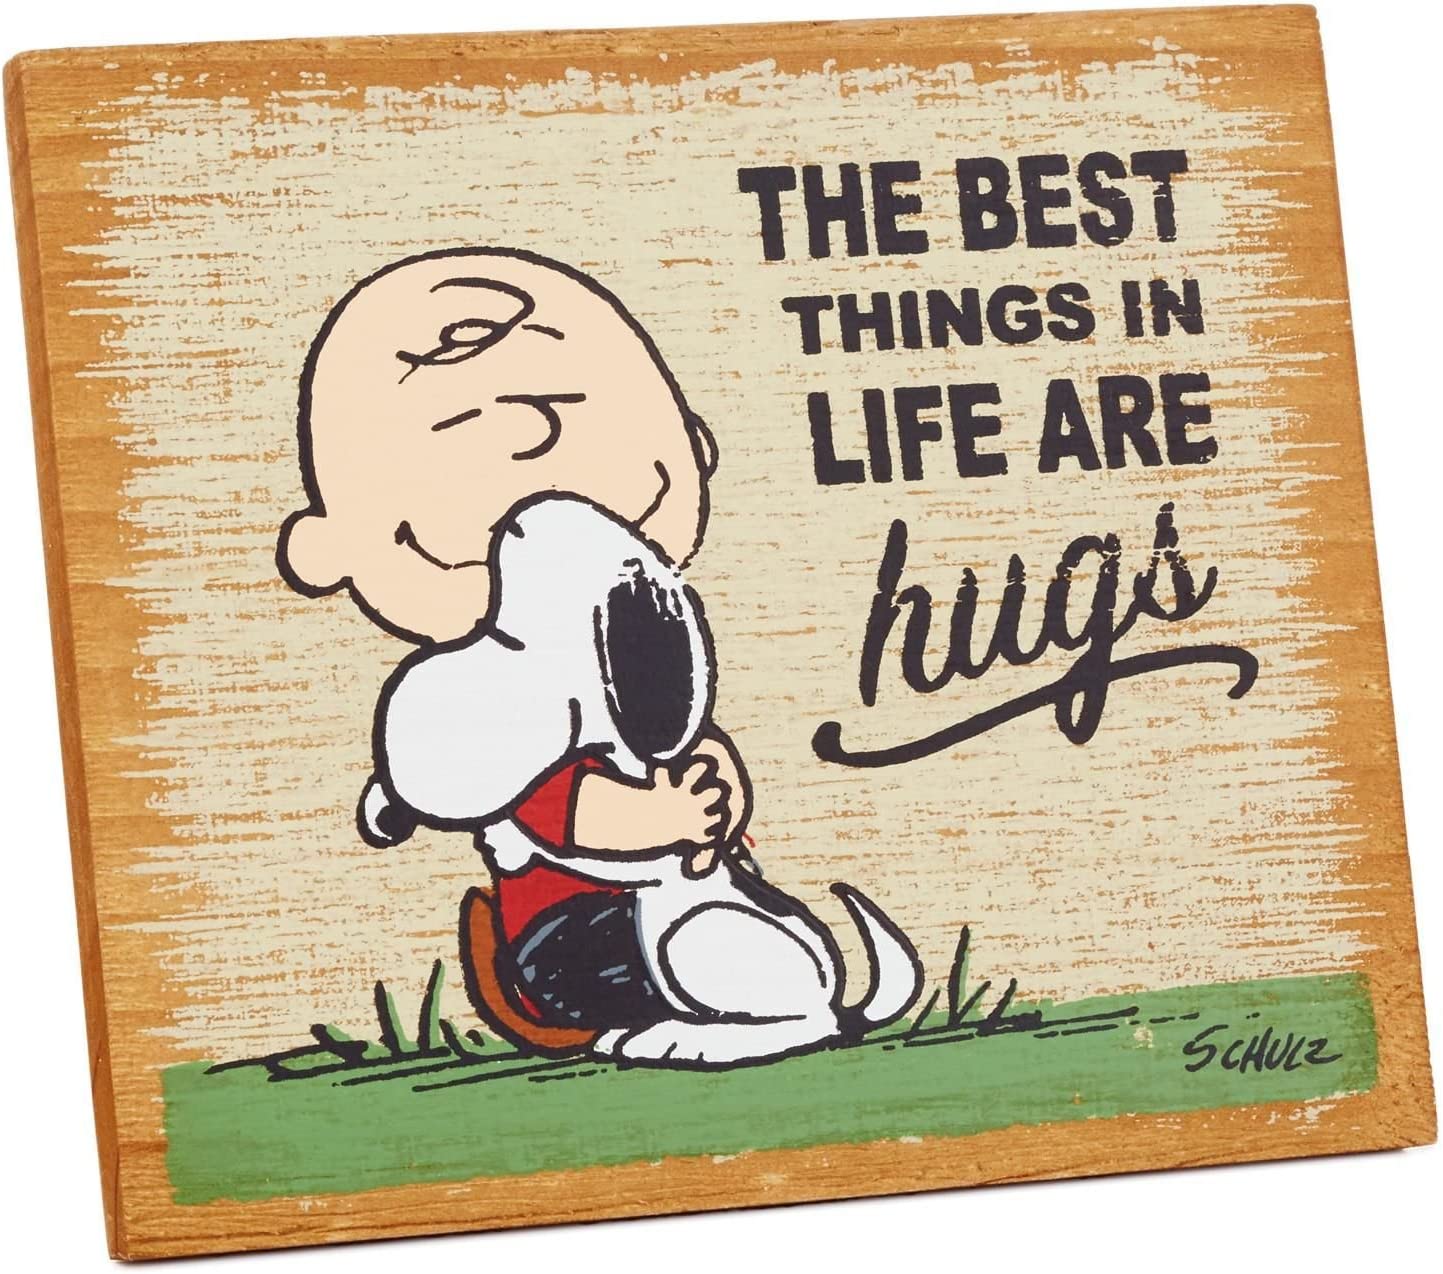 Peanuts "The Best Things are Hugs" Wood Quote Sign